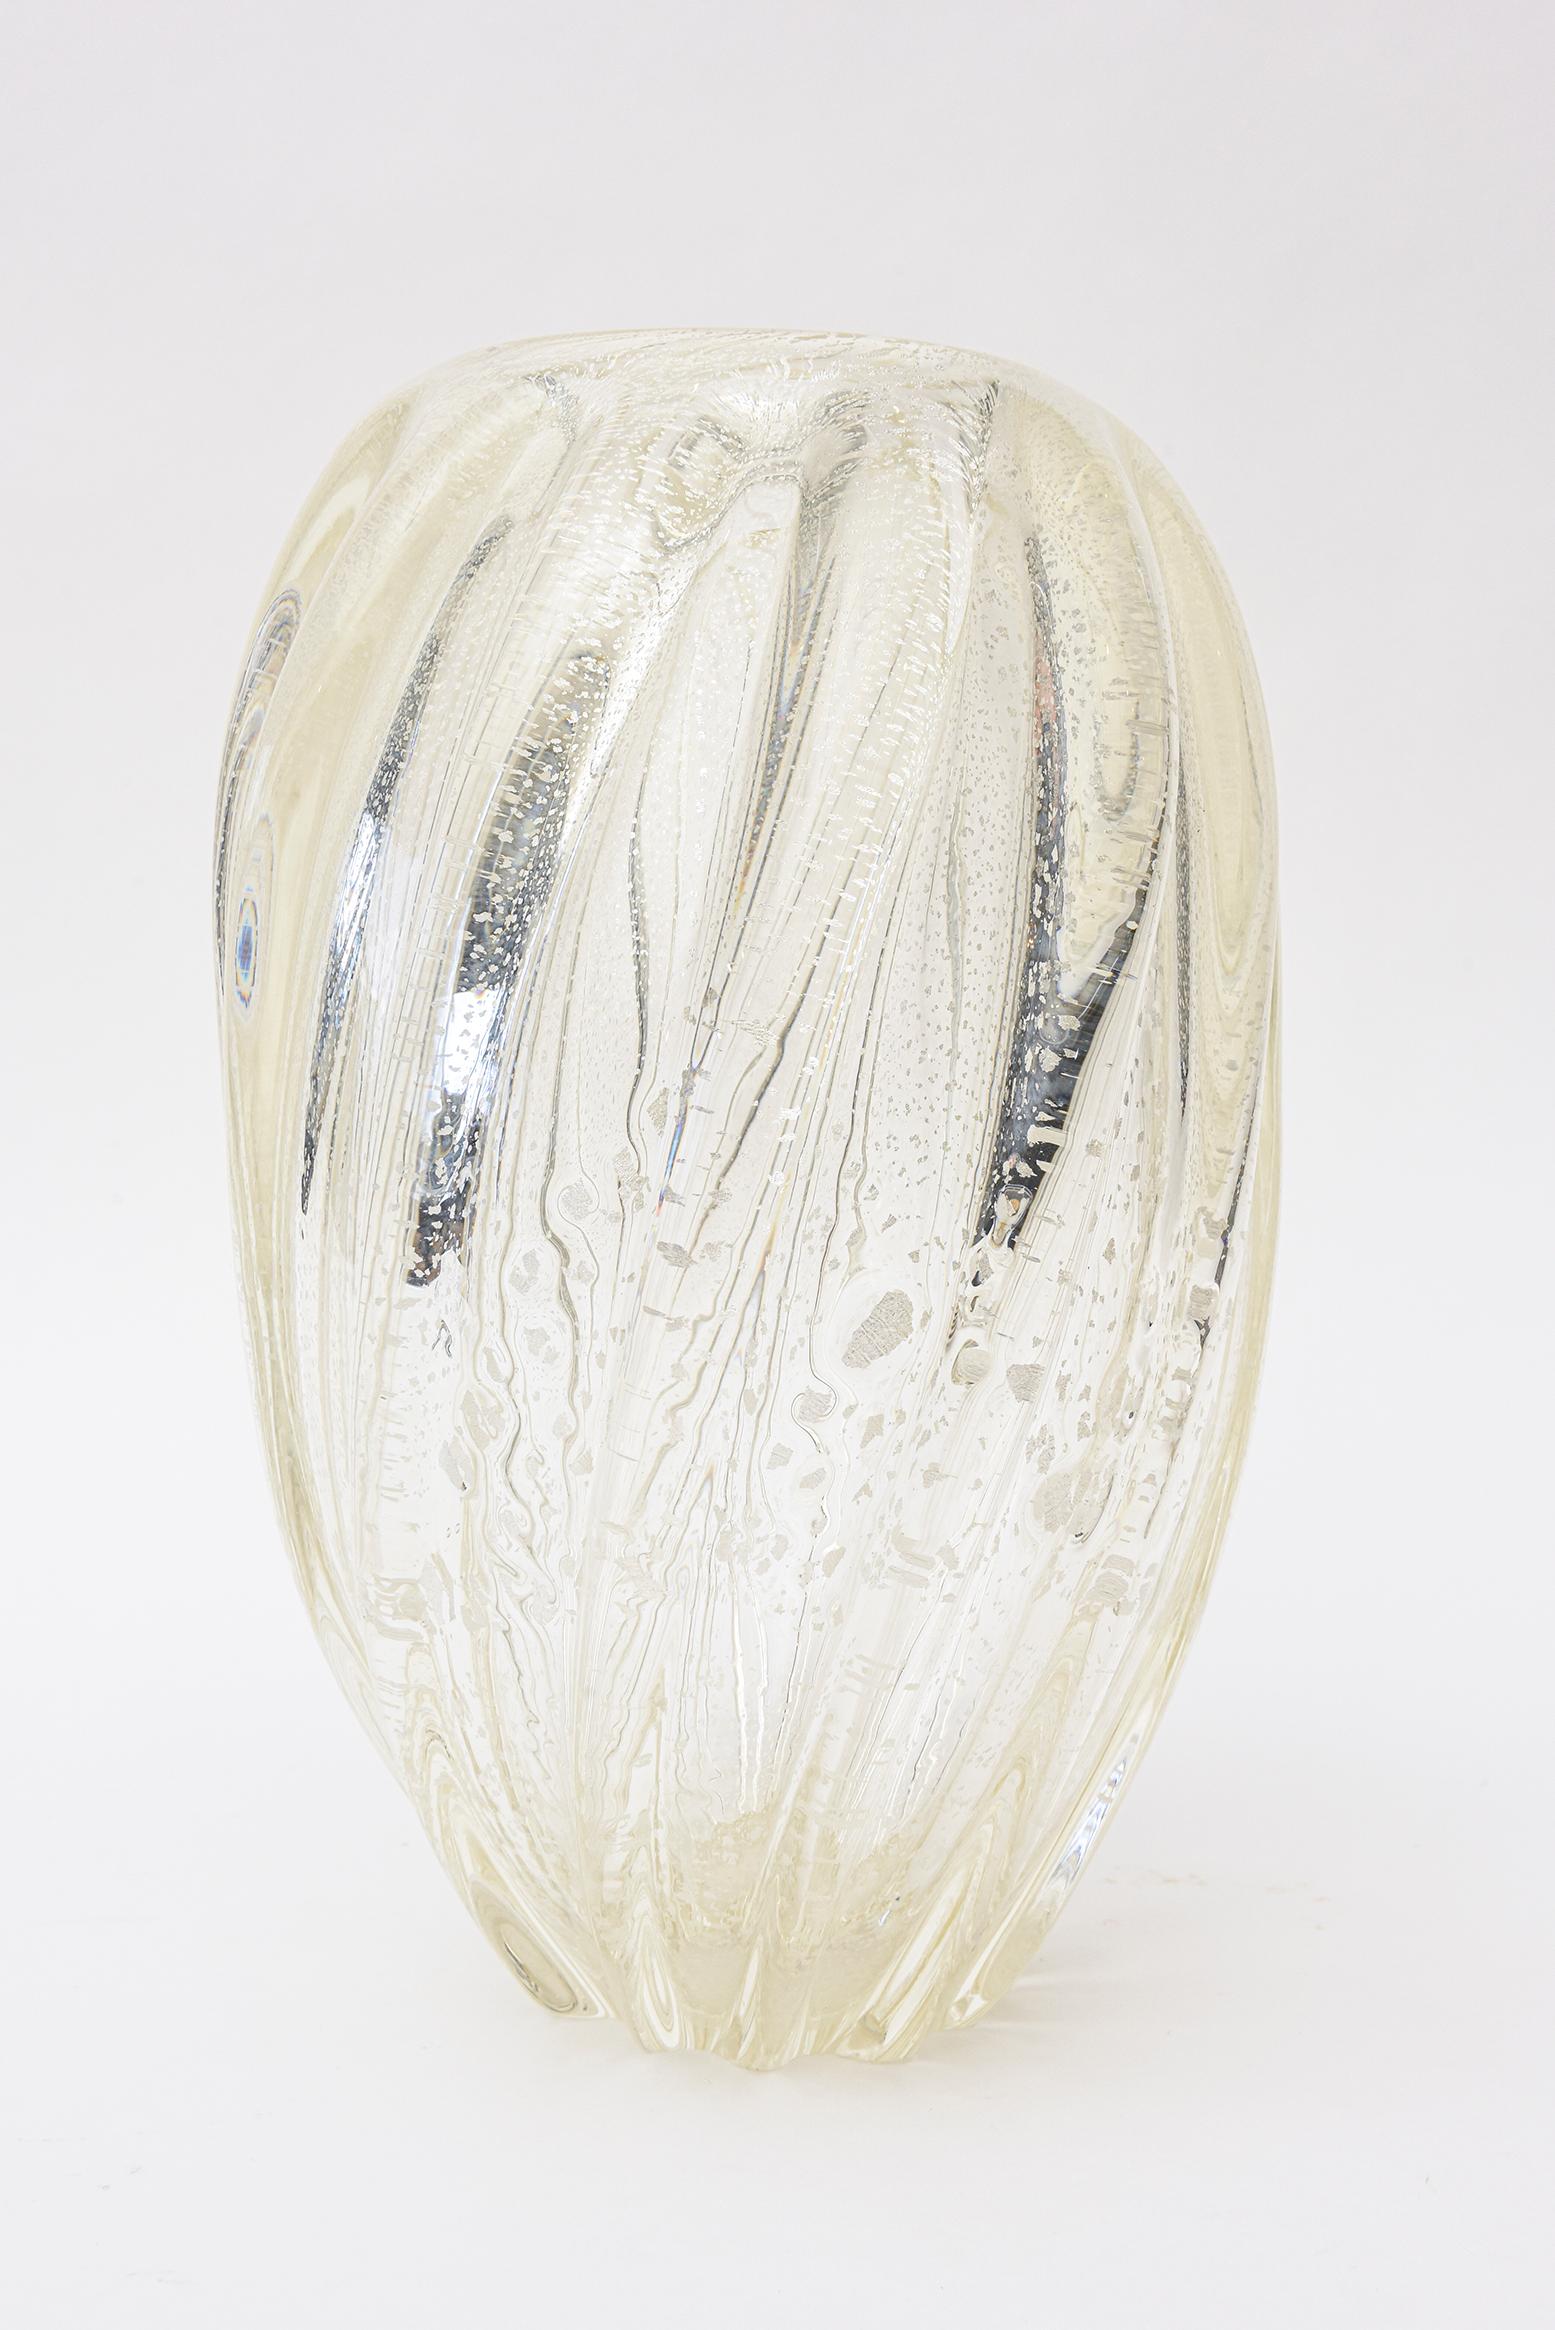 This stunning and large Italian Murano glass vase is by the masters of glass blowing: Barovier e Toso and is an early work of theirs from the late 1930s or early 1940s. It is ribbed swirled glass and has inclusions of white and silver foil